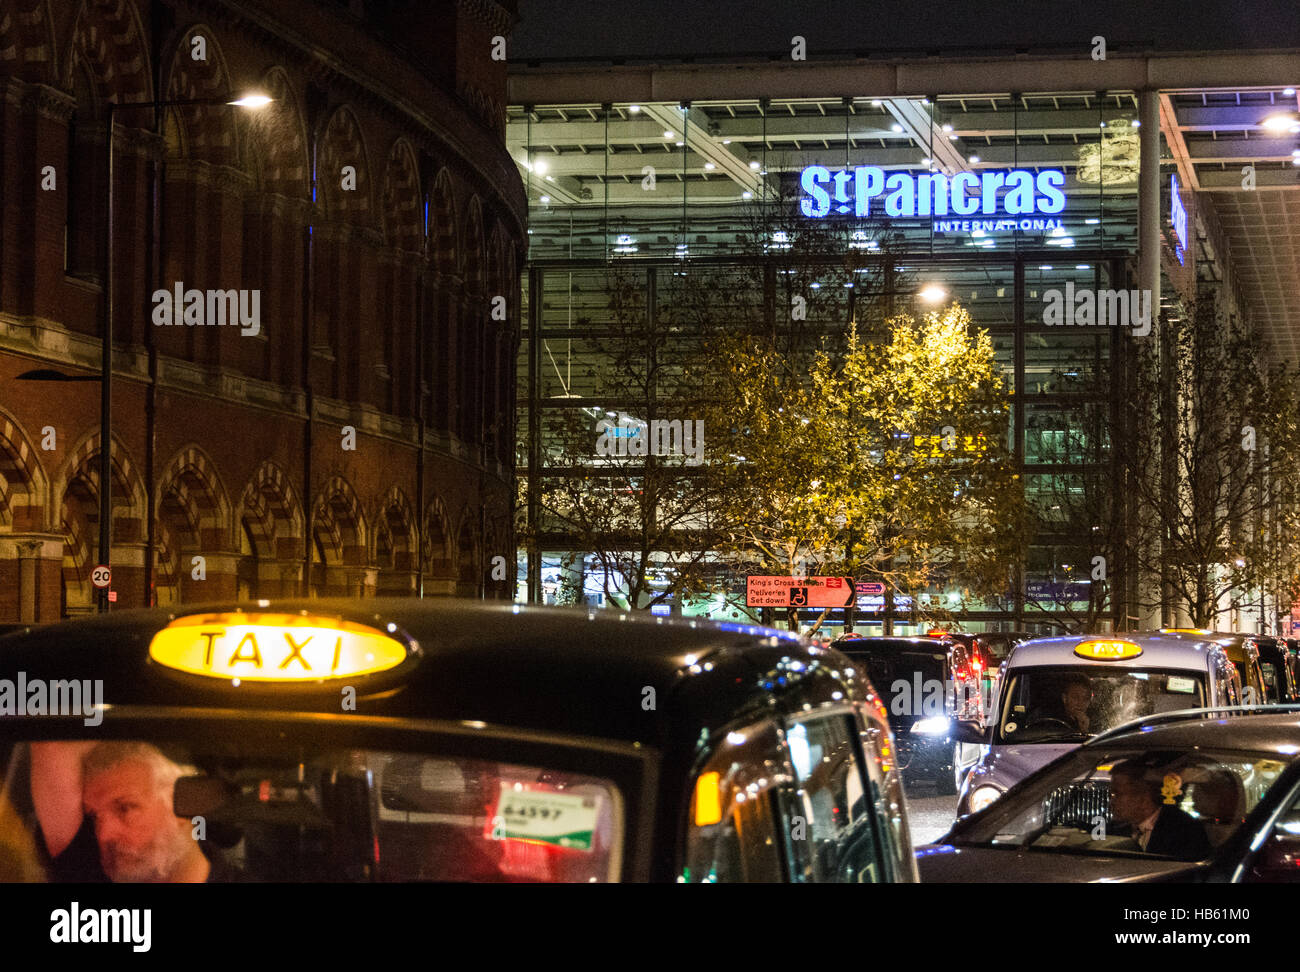 Taxis outside St. Pancras station in London, England, UK Stock Photo